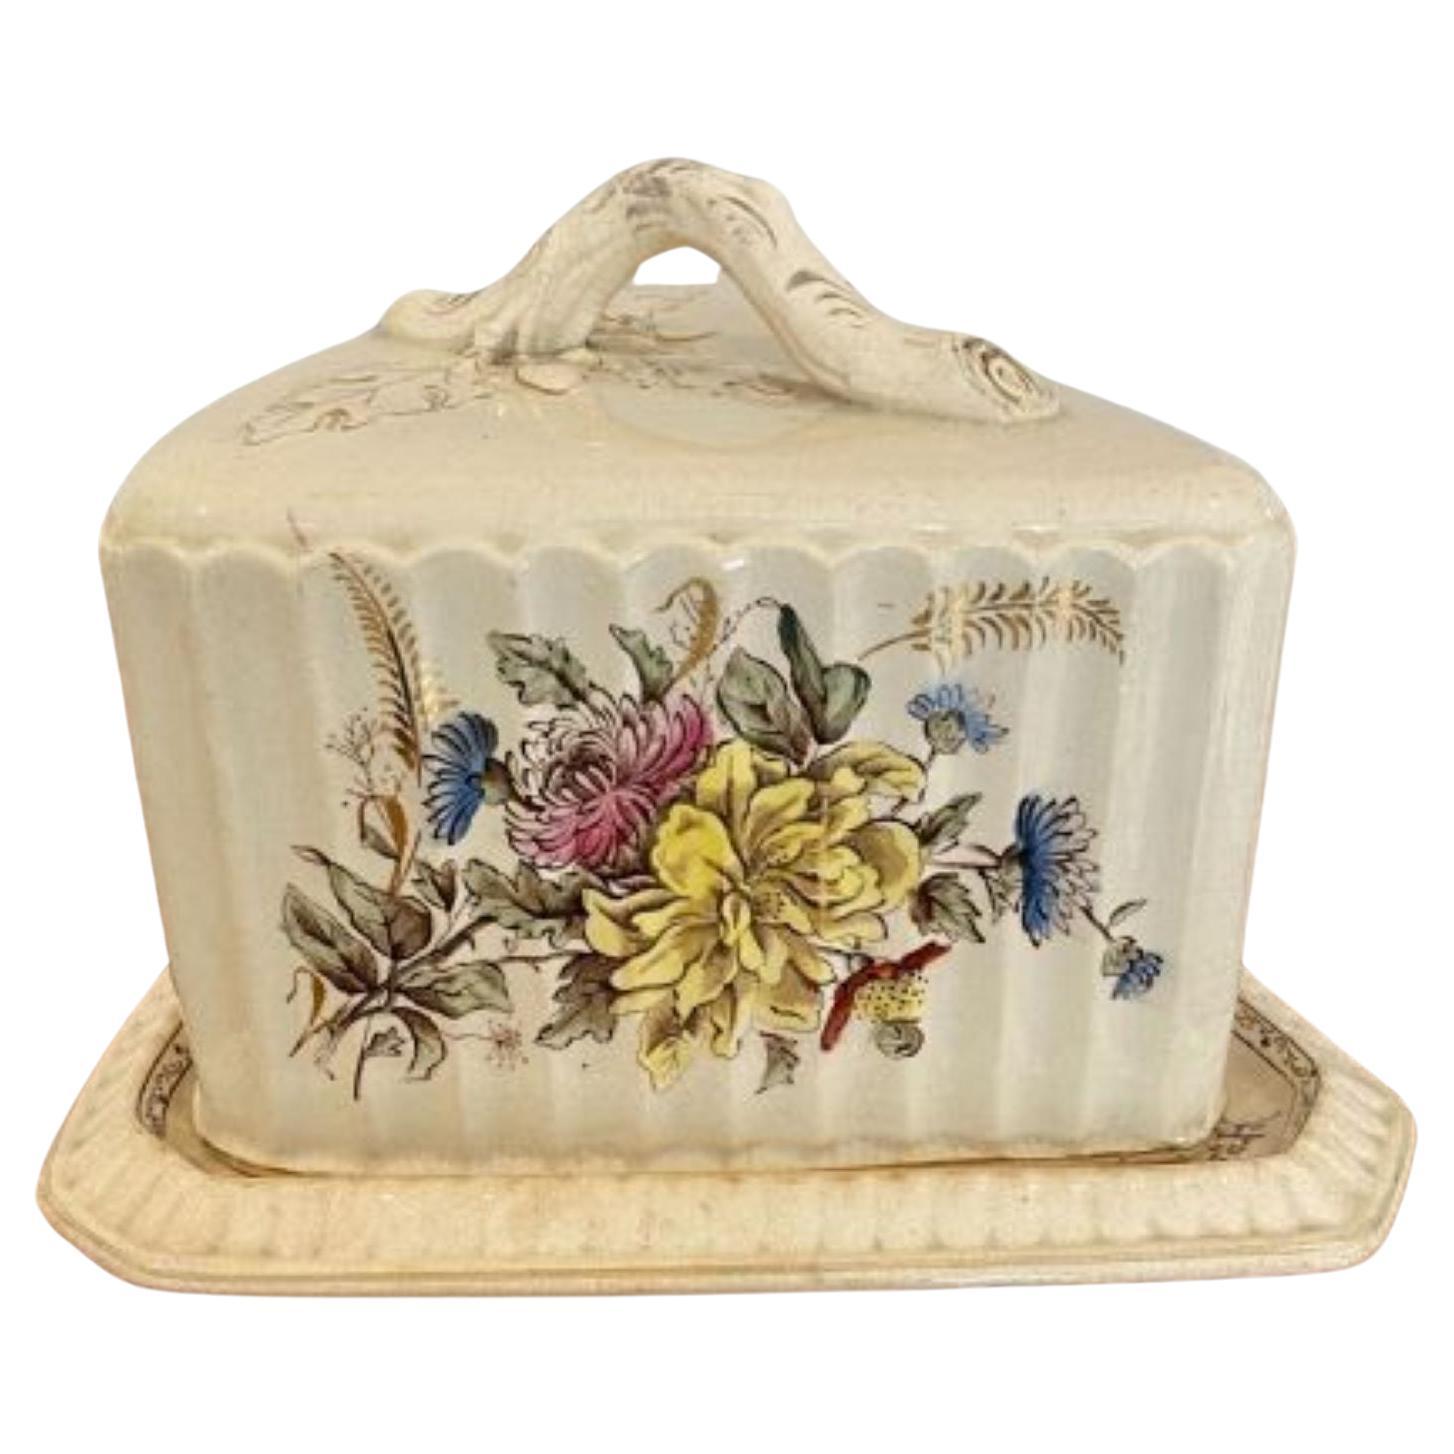 Antique English Ceramic Cheese Keeper or Butter Dome, 1900 for sale at  Pamono